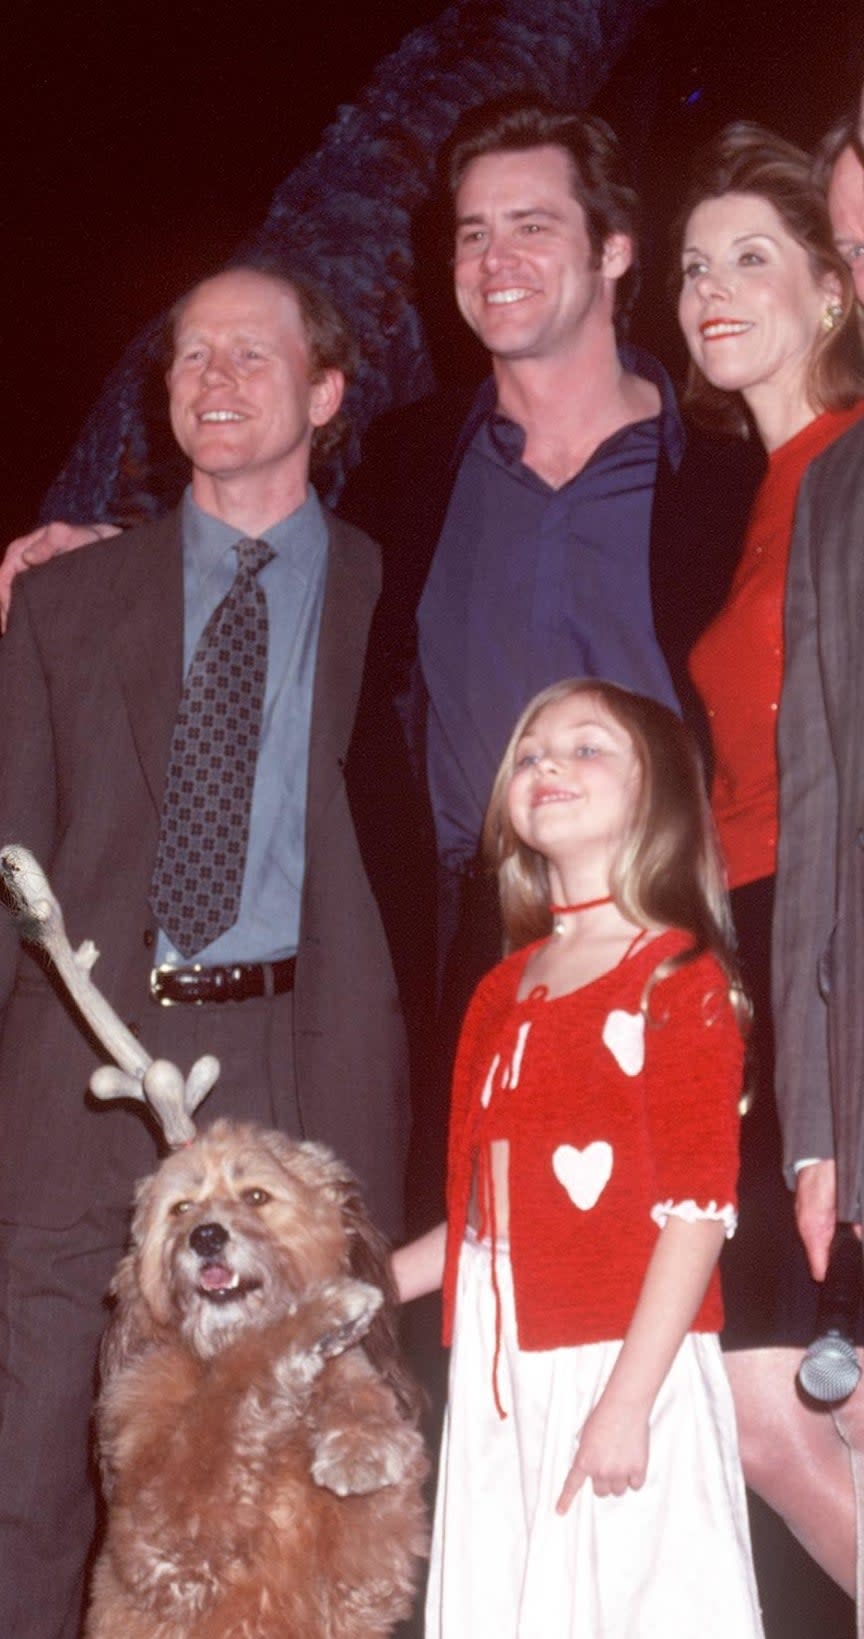 Close-up of Taylor smiling with Jim and other movie costars